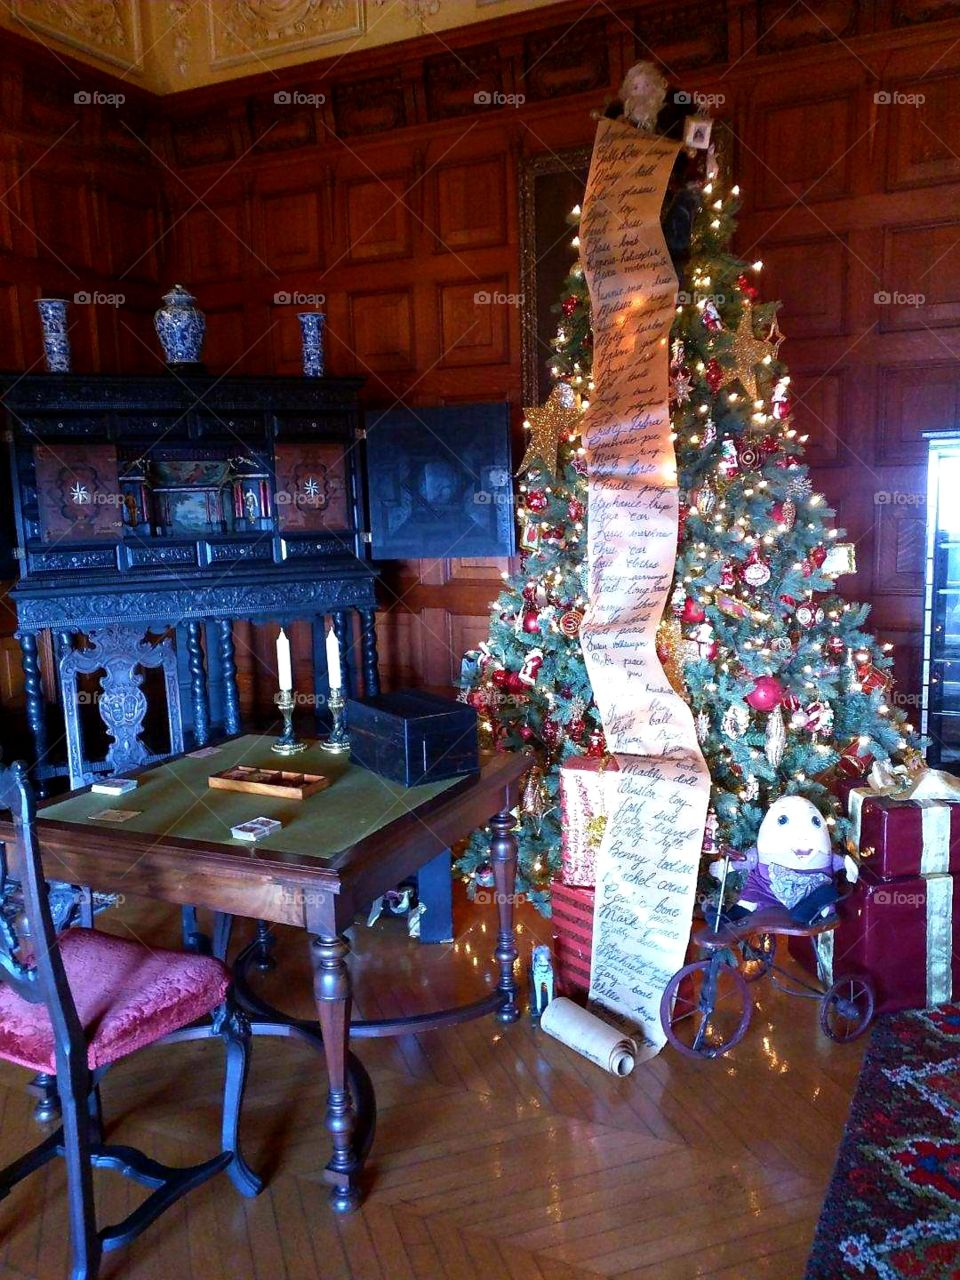 inside the beautiful Biltmore Estate in Asheville NC. just one of the many trees that adorn the house during Christmas time. the toys around the trees are original toys given to the Vanderbilt children.